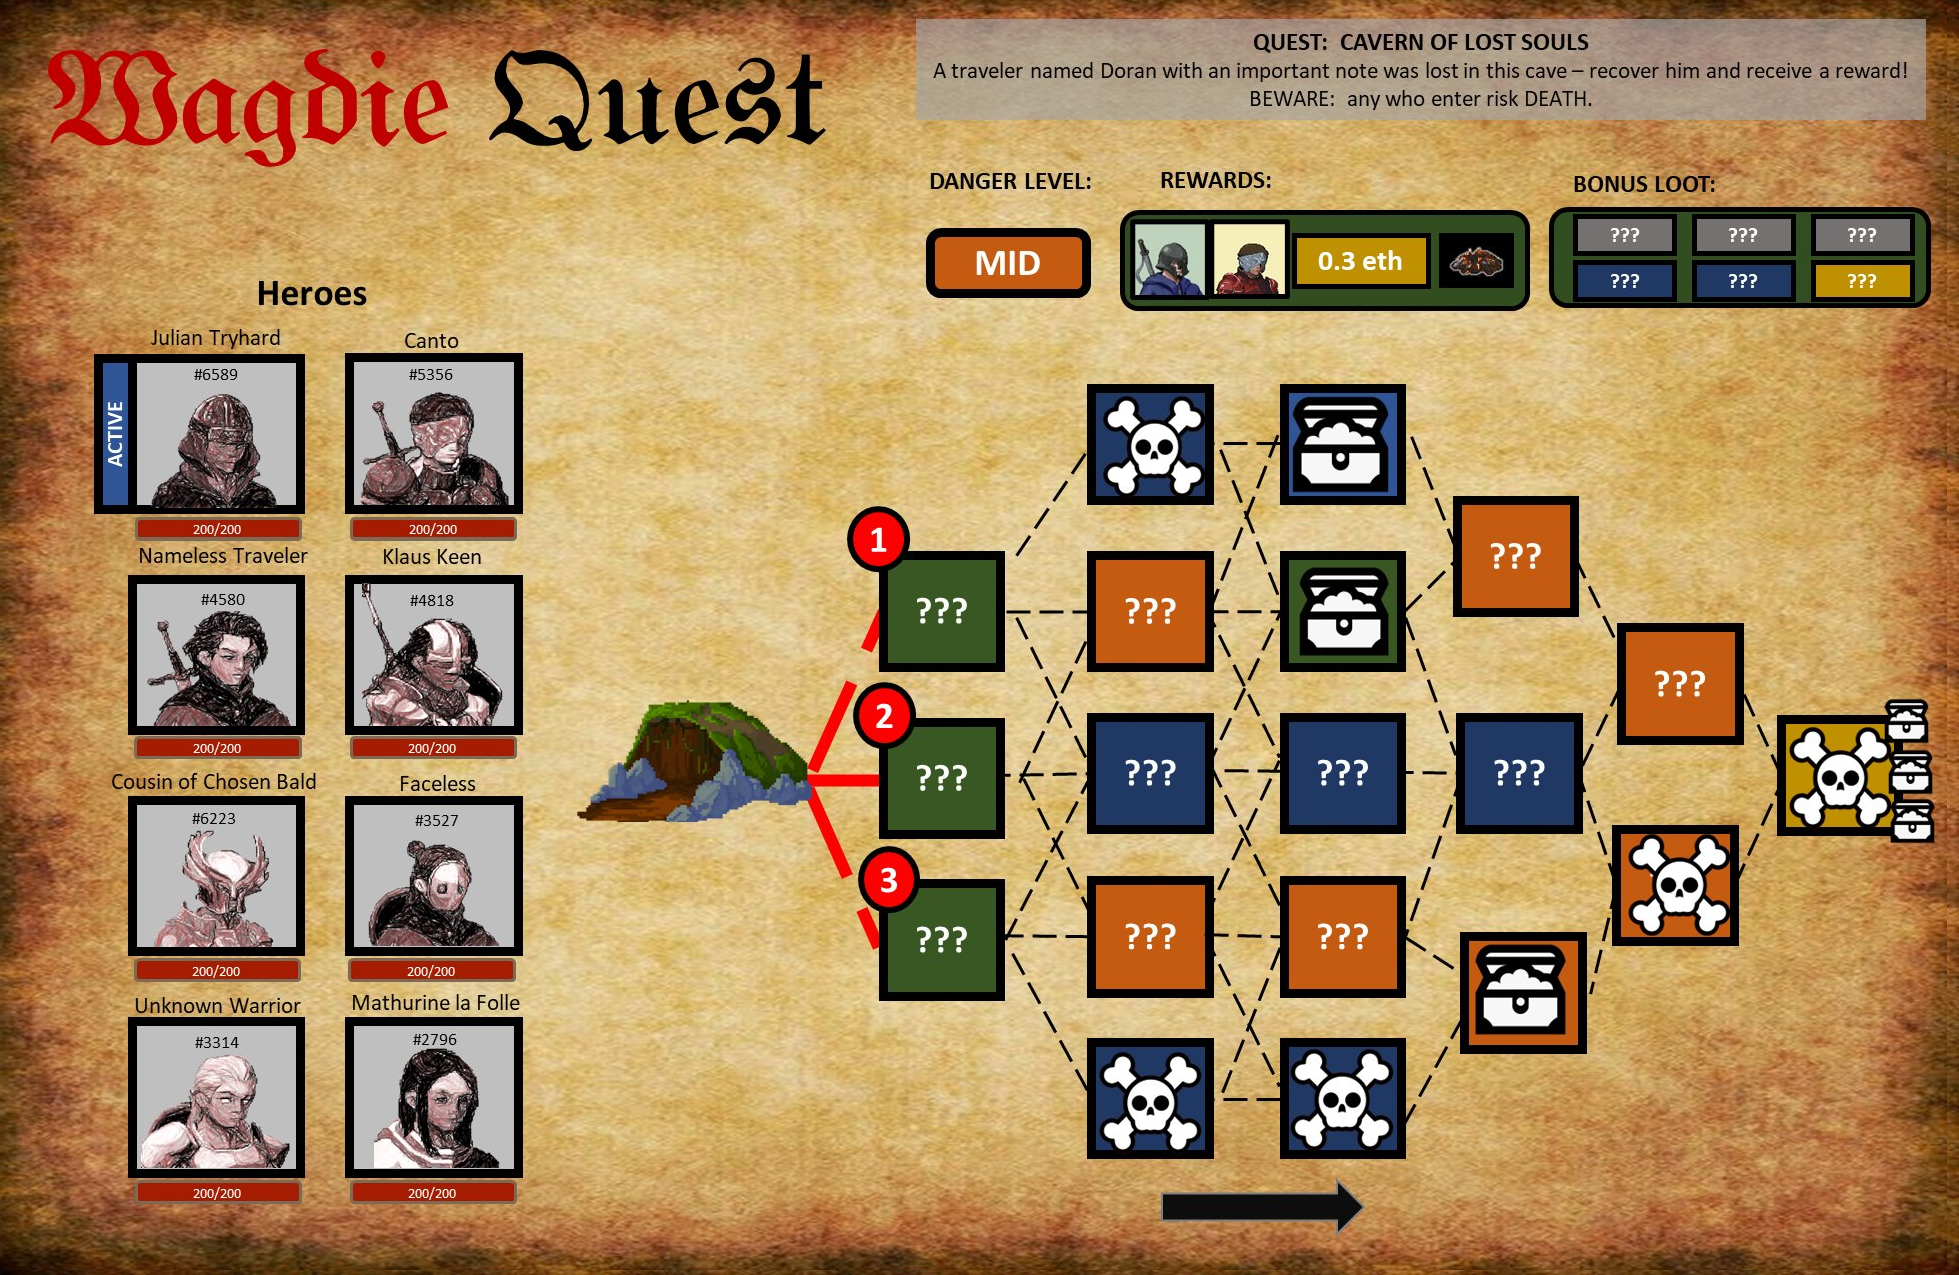 wagdie_quest_02.png